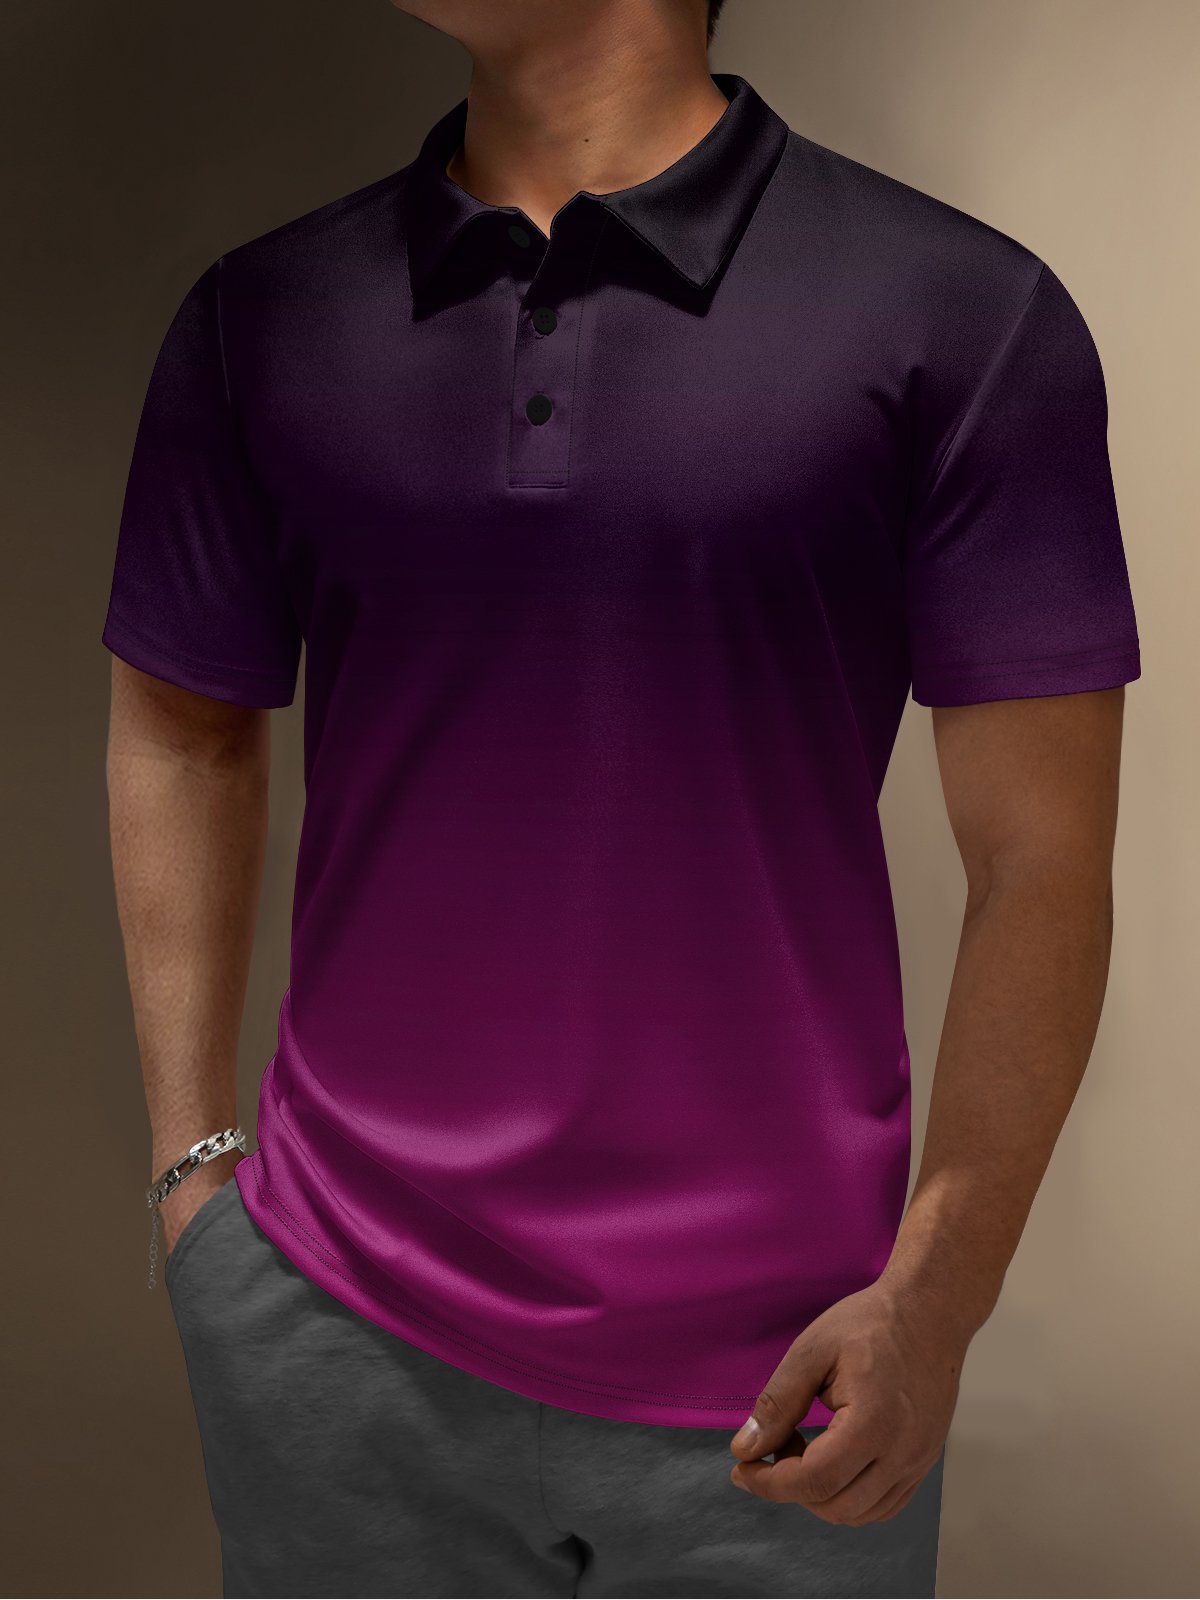 Hardaddy Moisture-wicking Golf Polo Gradient Color